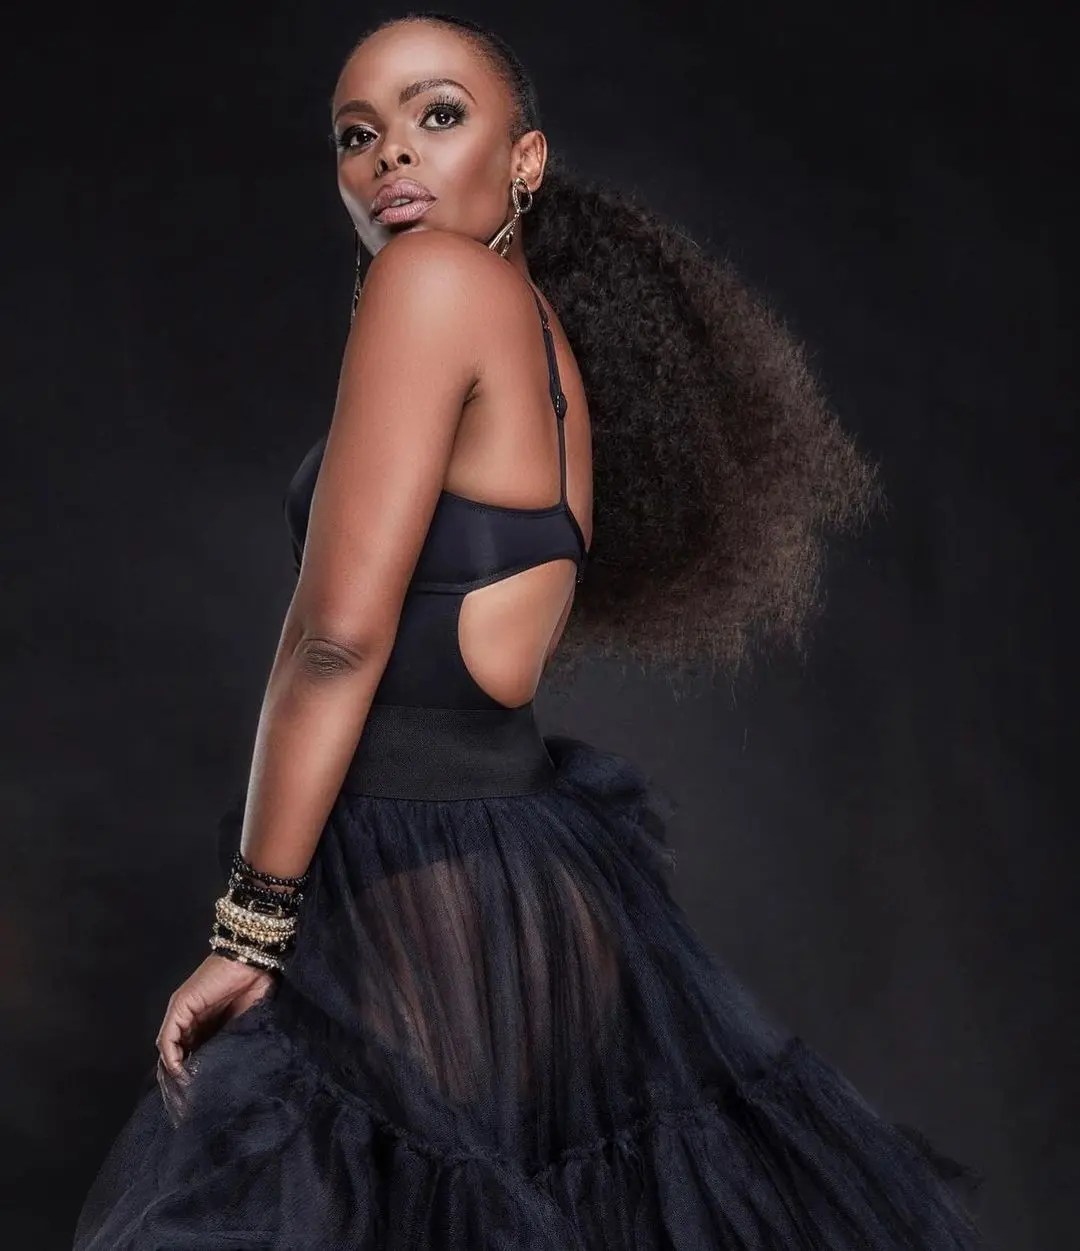 Unathi Nkayi speaks out after she was fired by Kaya FM